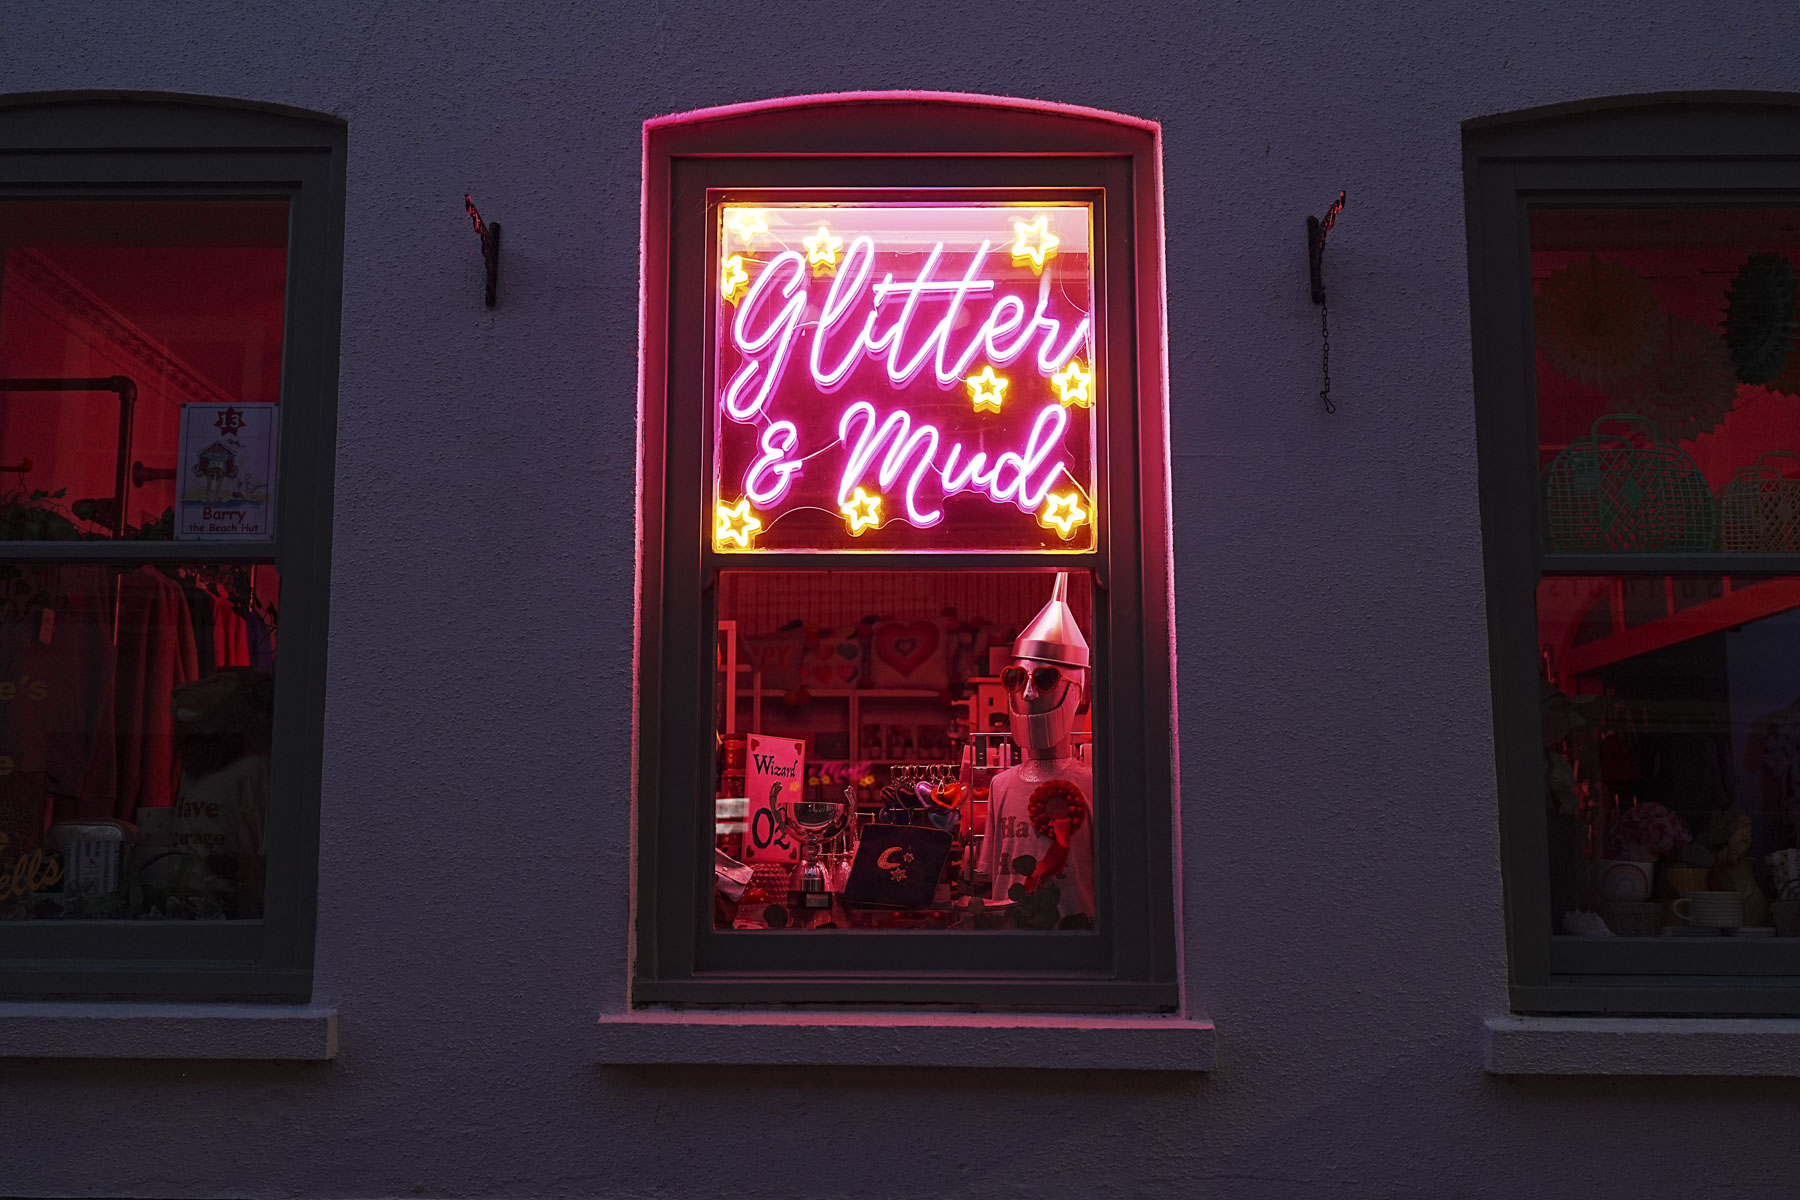 Neon lights in shop window at night, captured with the Sony A7C II full-frame mirrorless camera